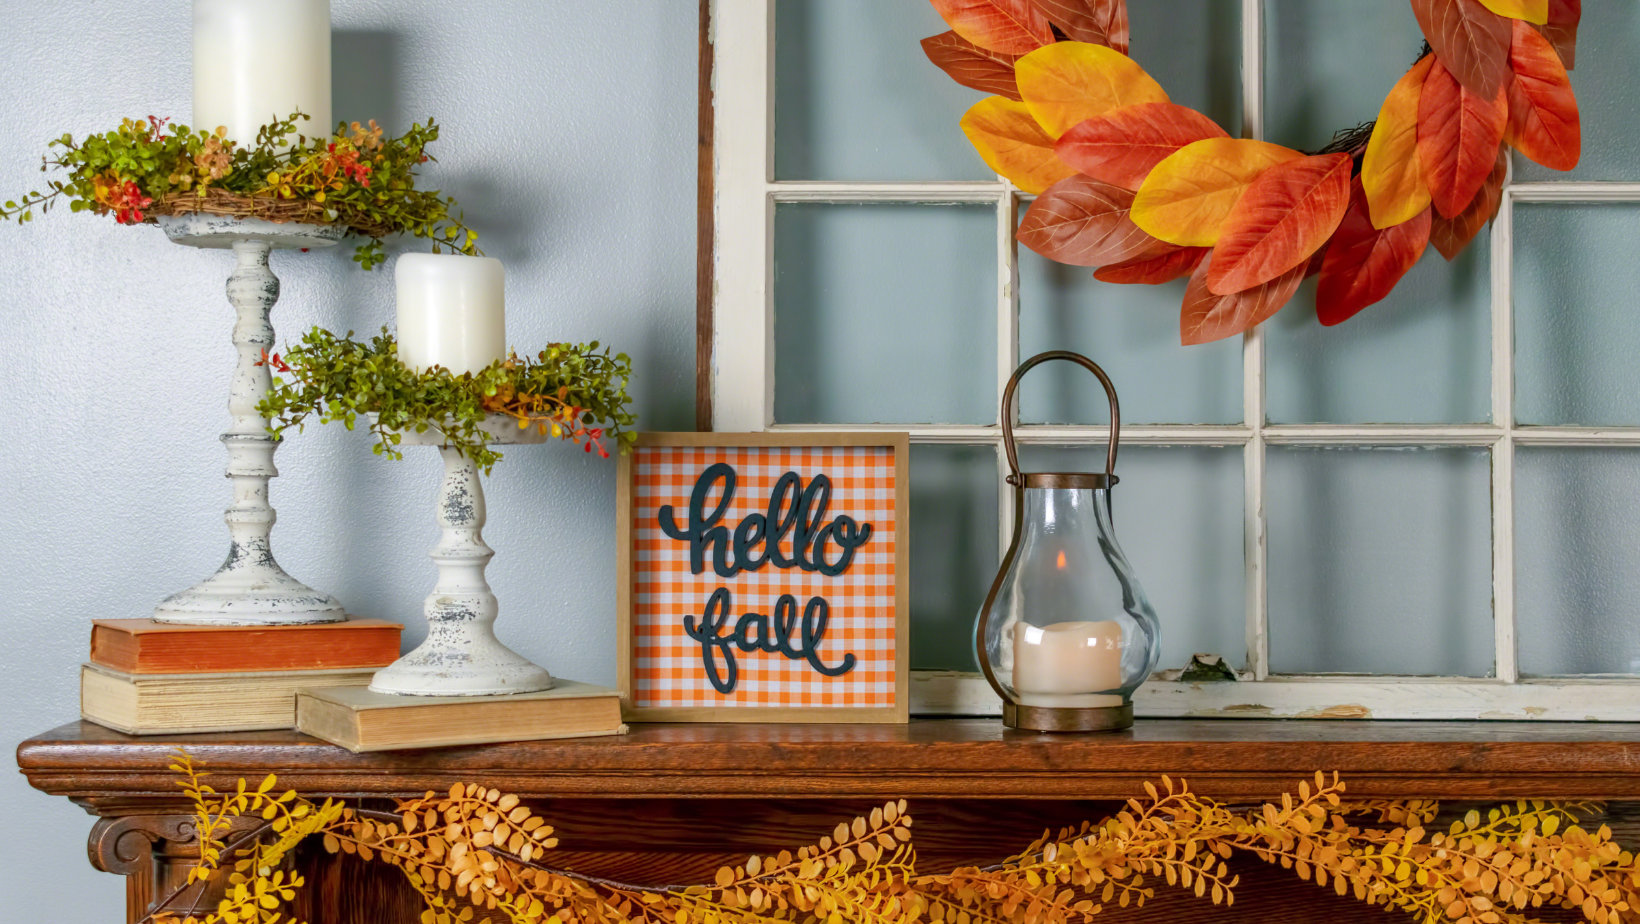 Fireplace mantle is adorned with candles, brightly colored leaves and other autumn-themed accents